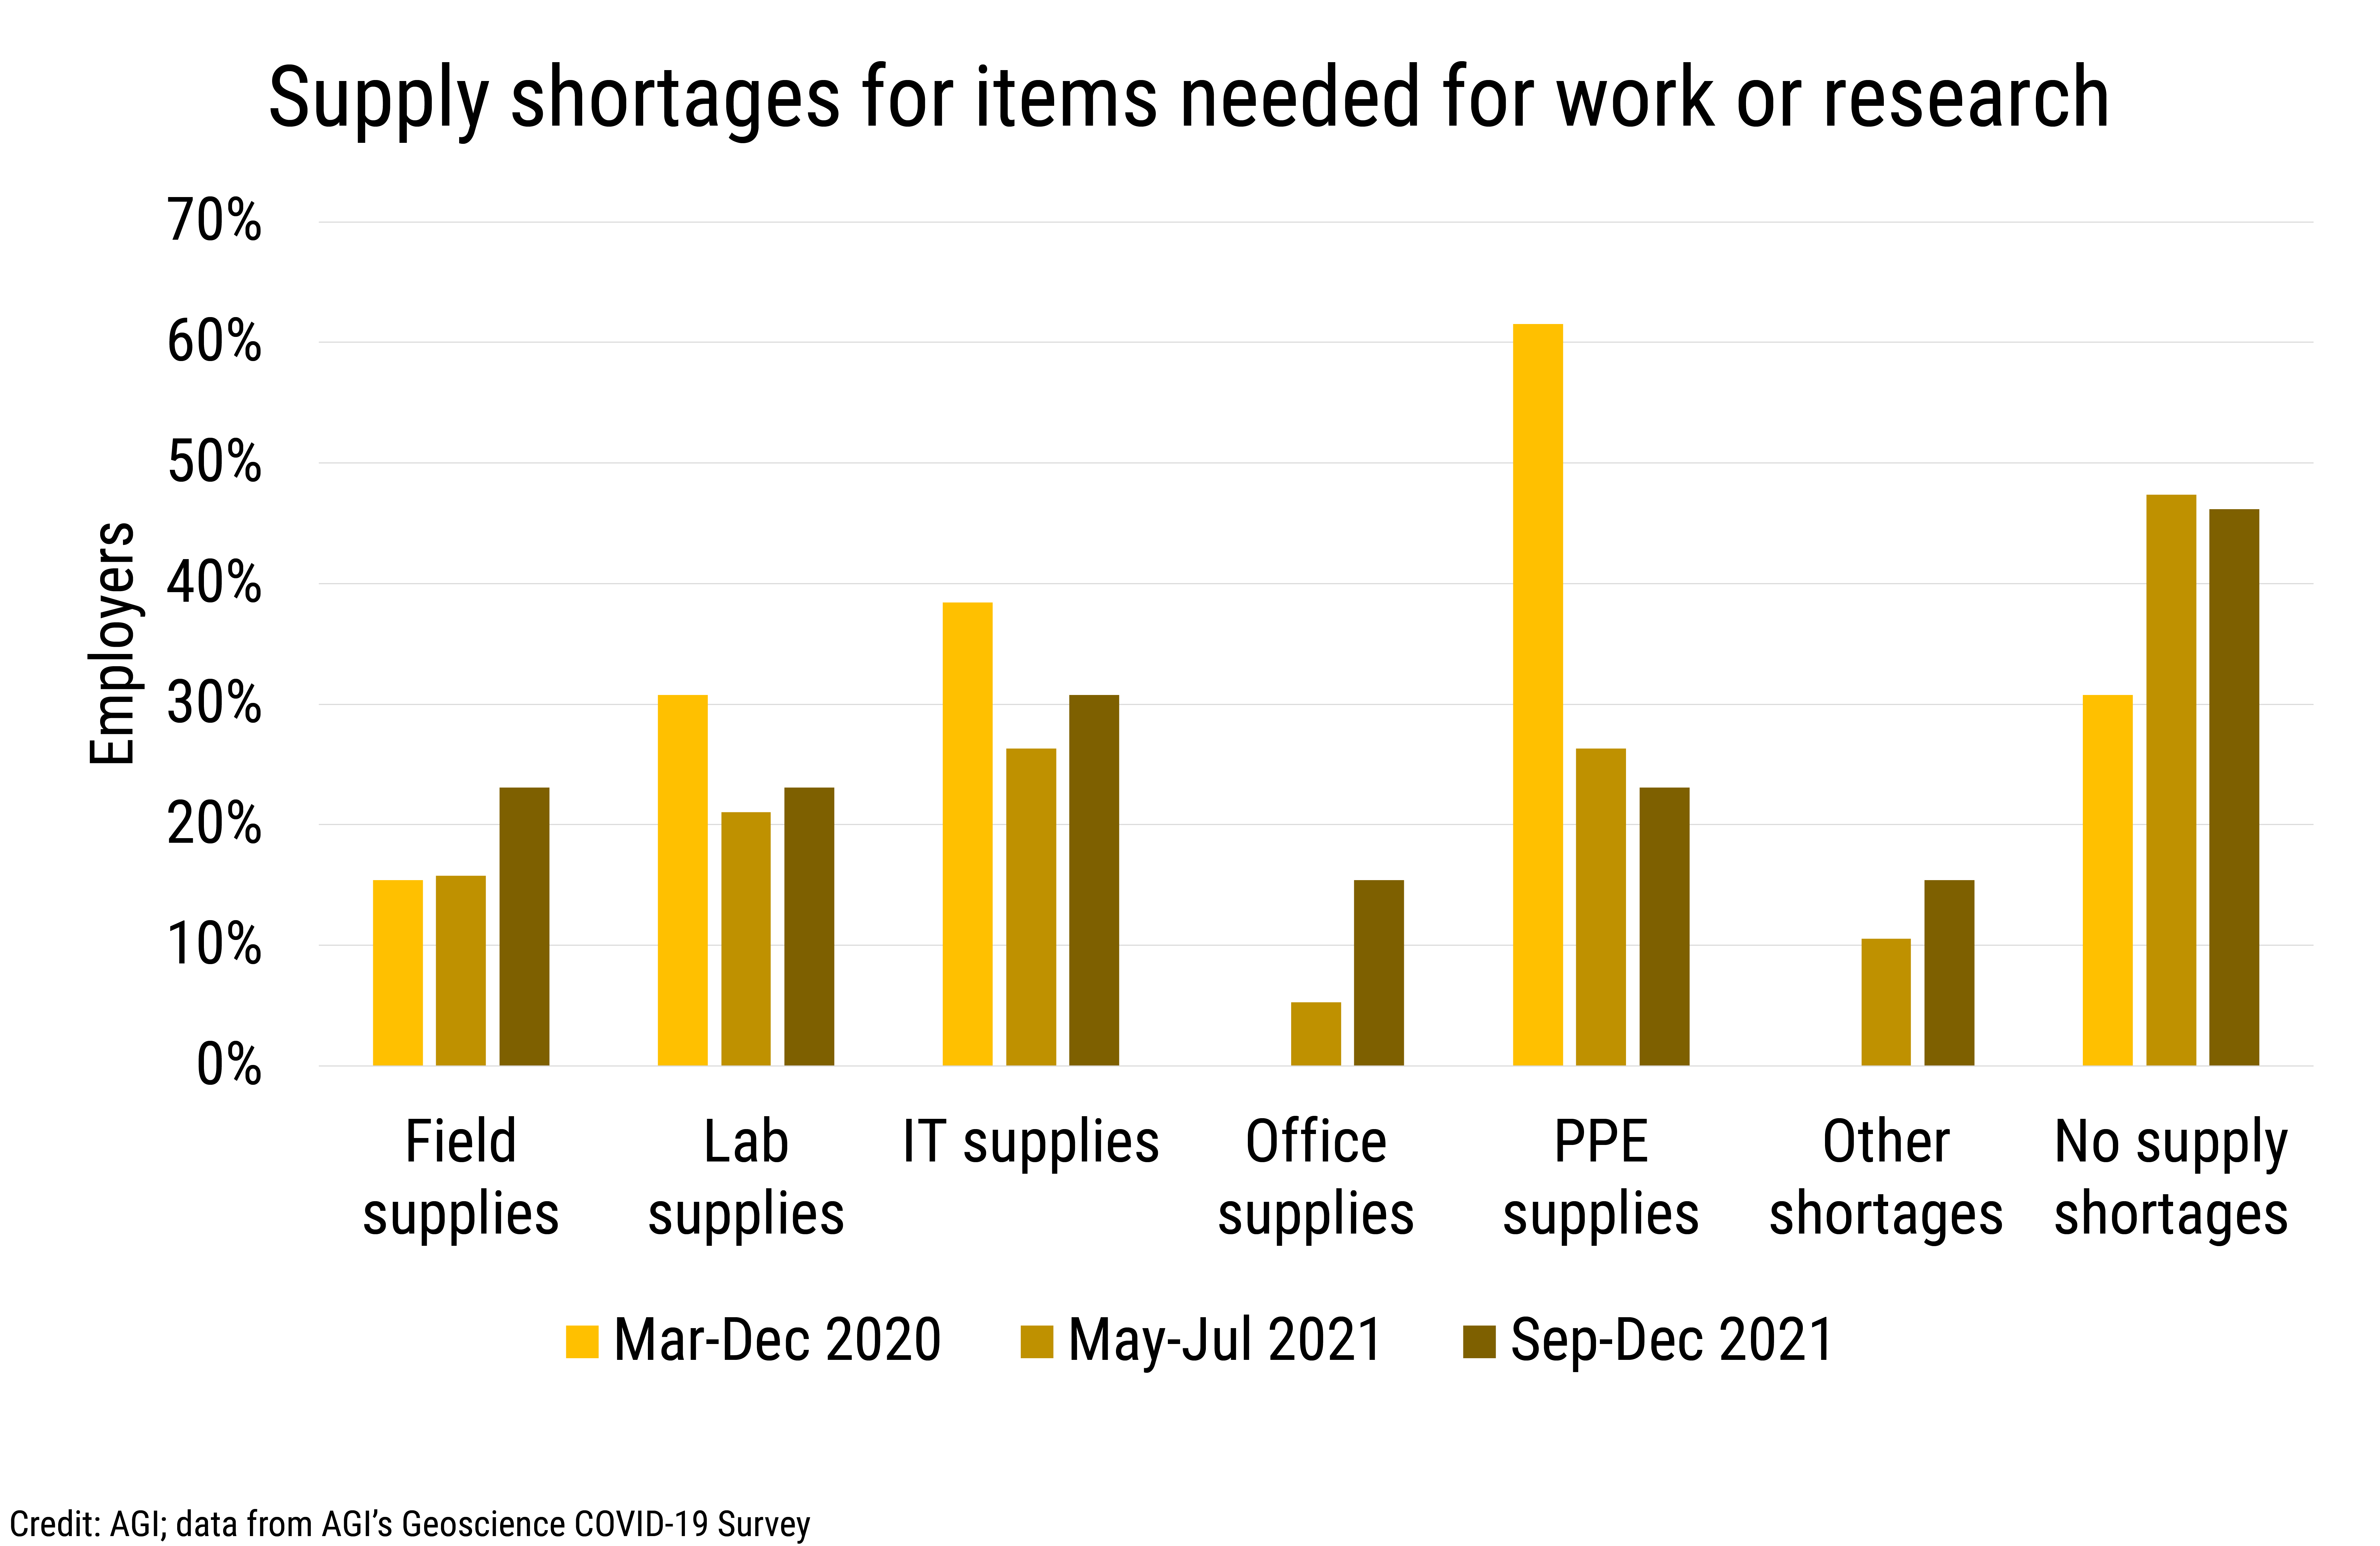 DB_2022-002 chart 07: Supply shortages needed for work or research (Credit: AGI; data from AGI's Geoscience COVID-19 Survey)